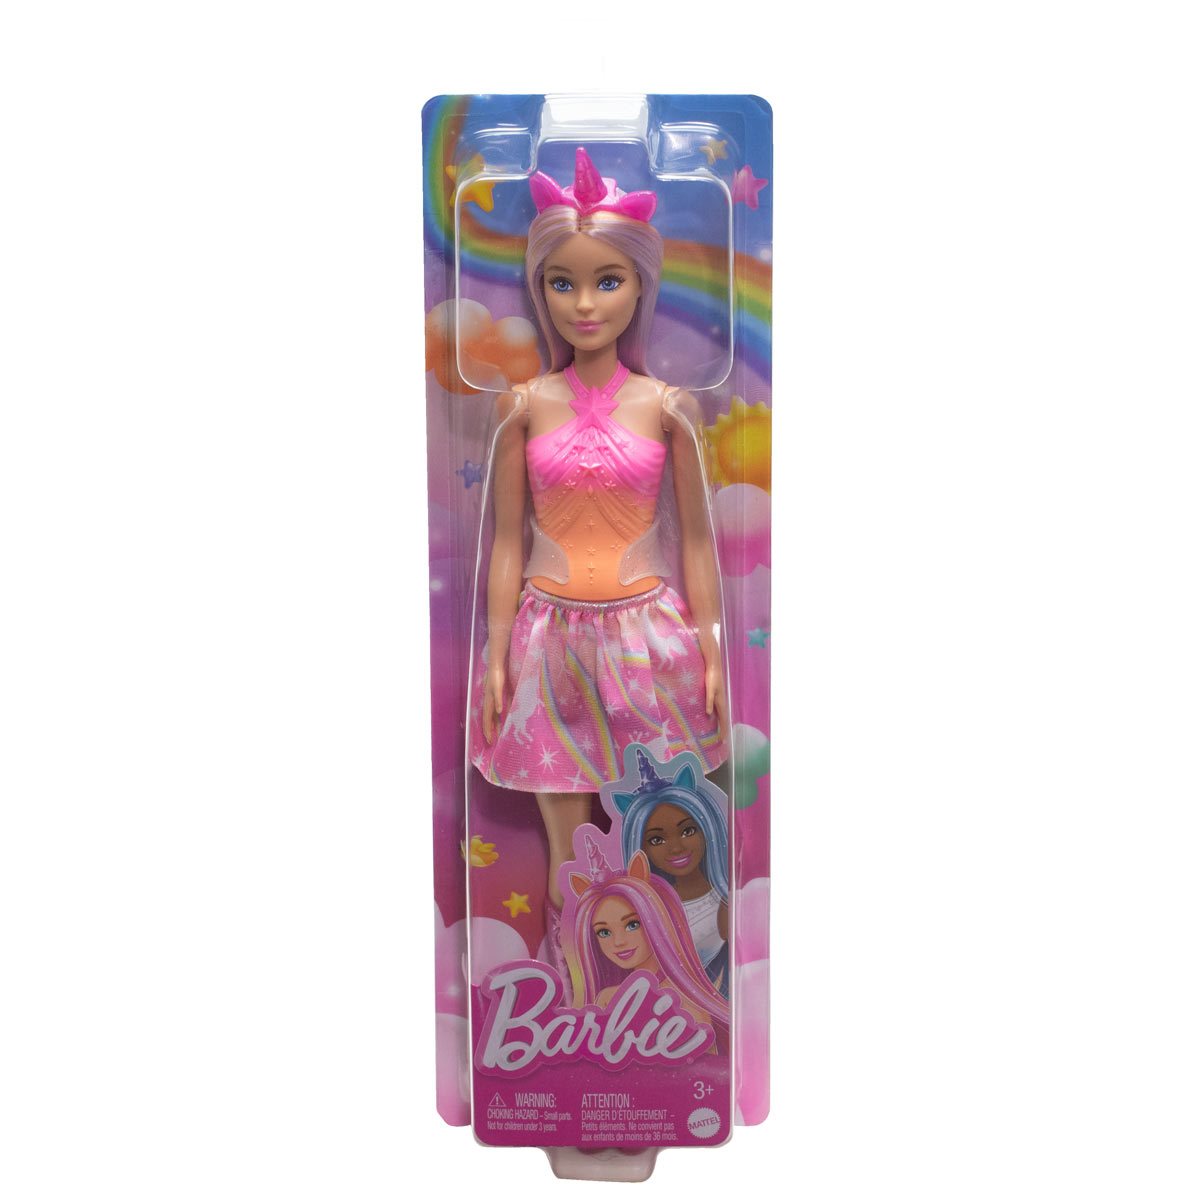 Barbie Unicorn Doll with Pink Hair - Entertainment Earth